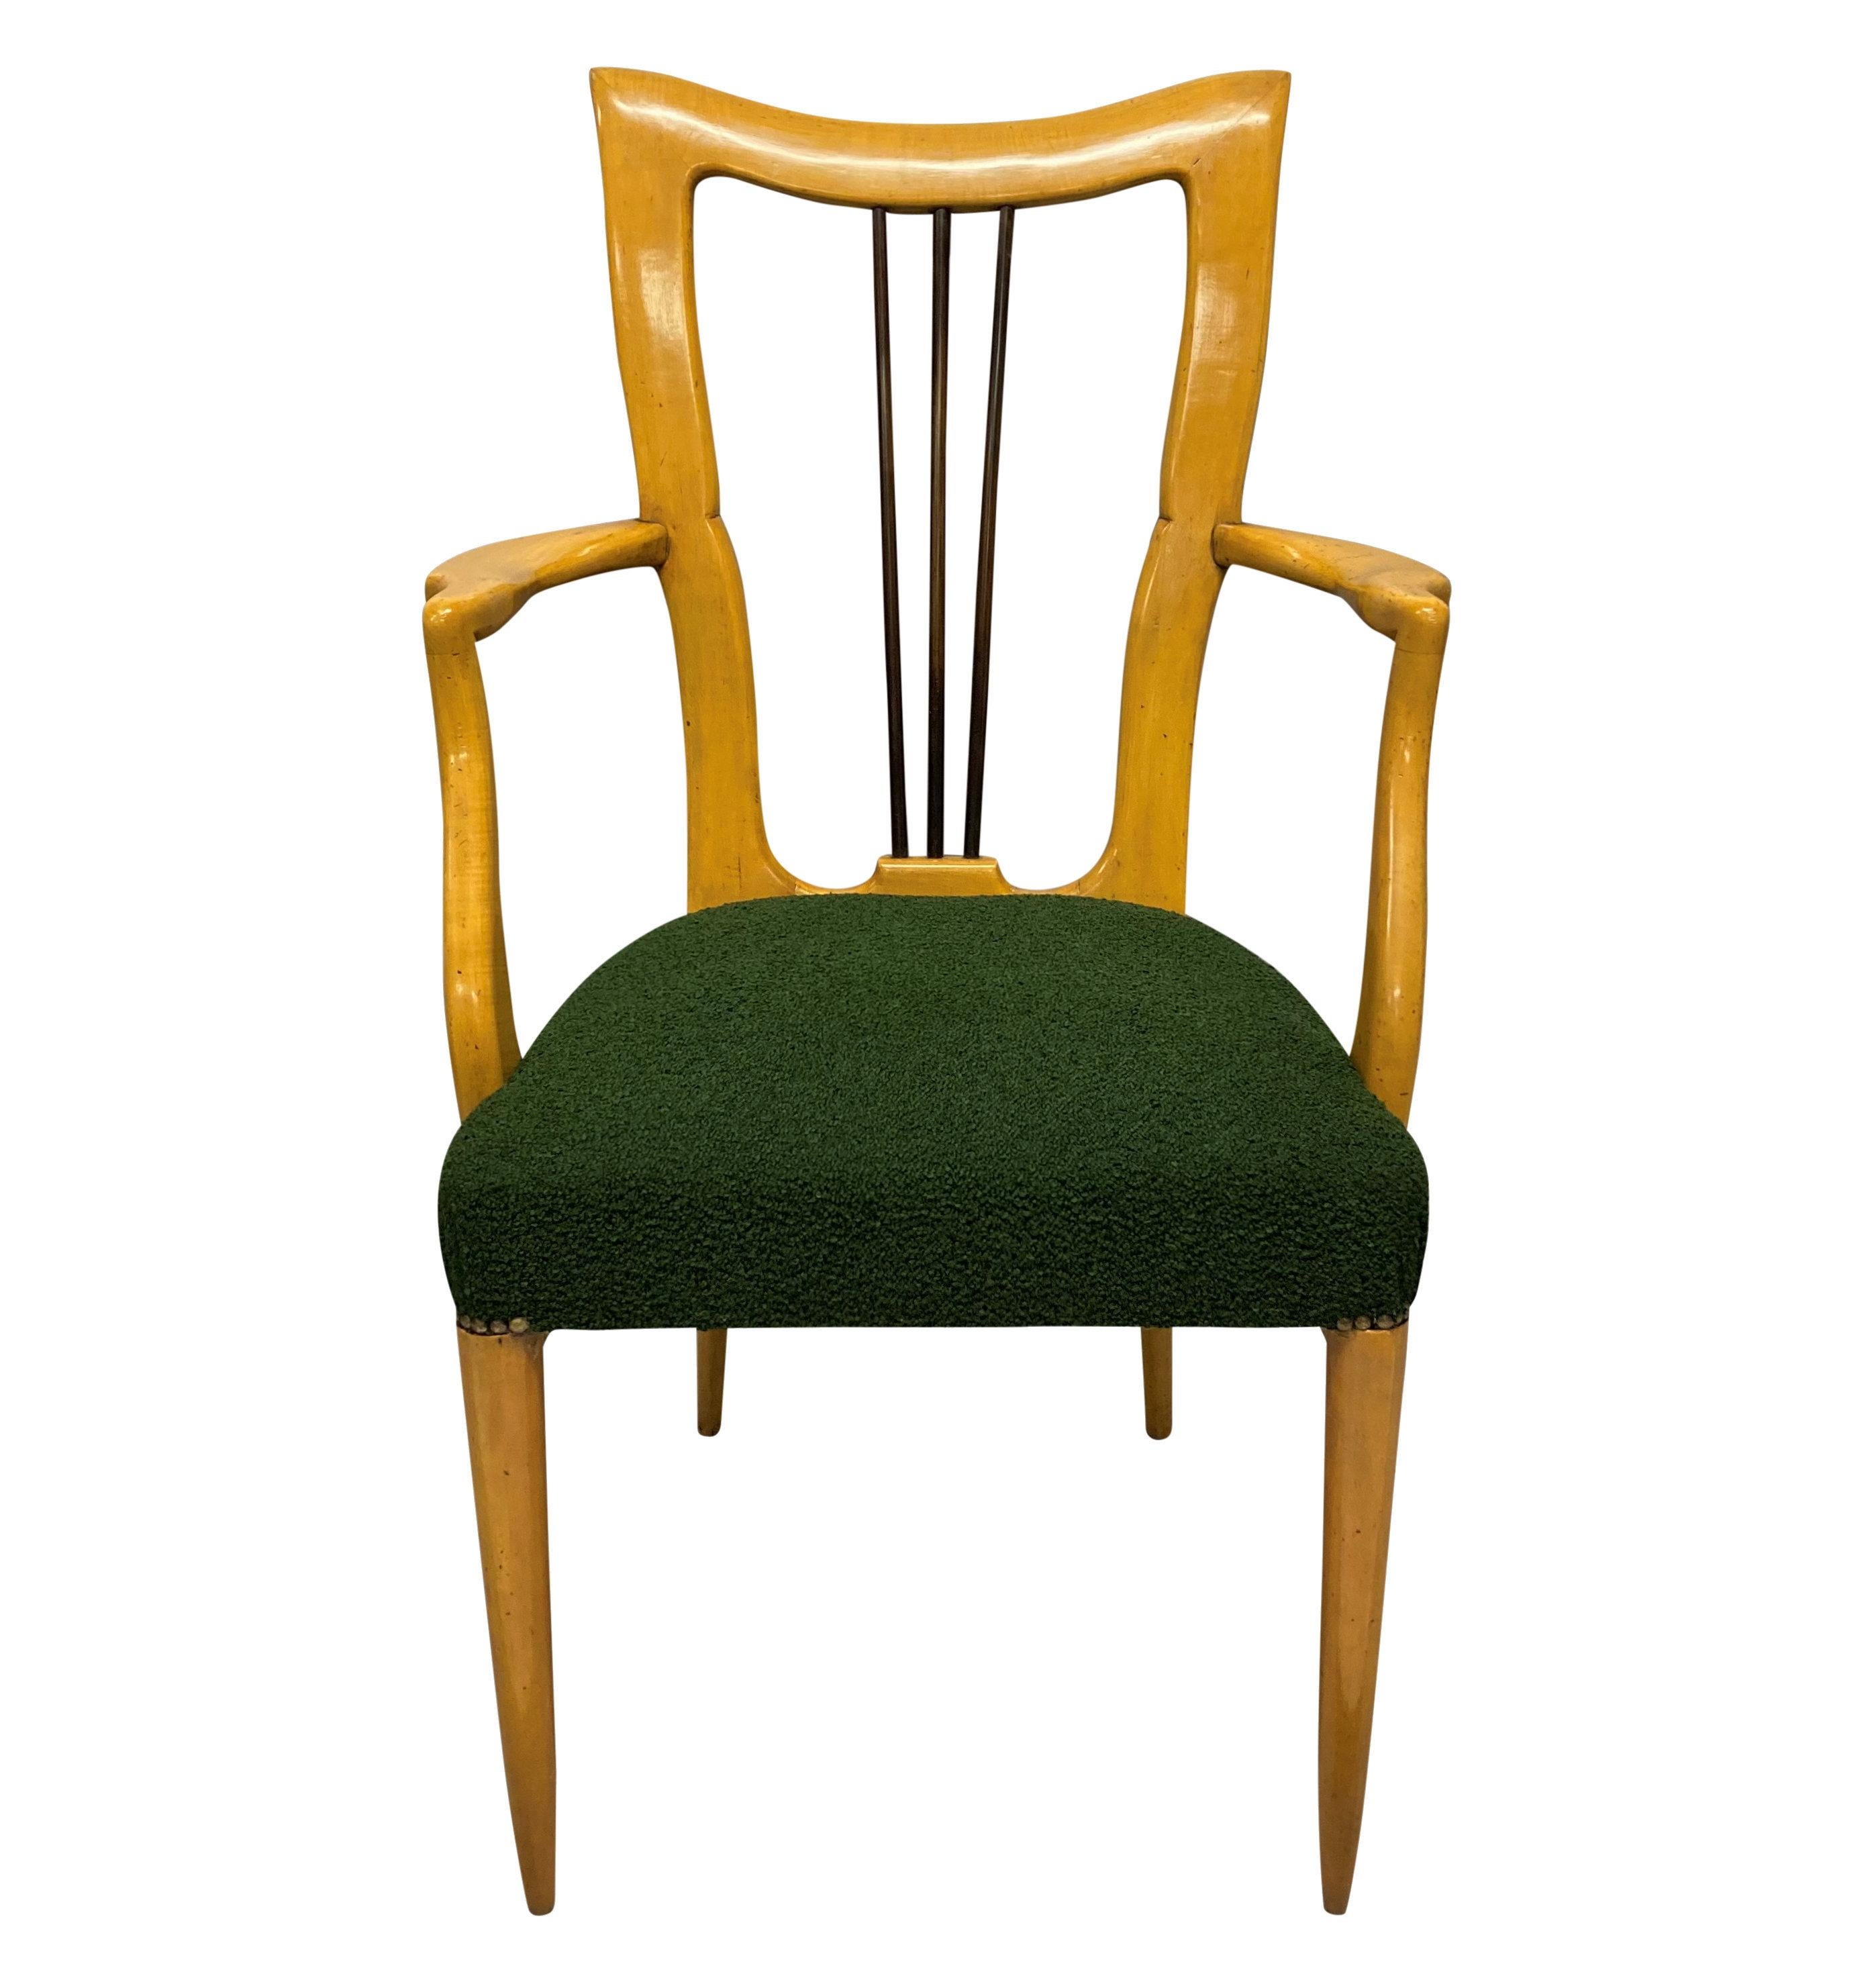 A set of ten Italian Mid-Century dining chairs by Paolo Buffa in birch wood. With beautifully sculpted lire shaped backs and newly upholstered in dark green wool boucle.

Measure: 100cm high (backs) x 49cm high (seats) x 46cm wide x 49cm deep &